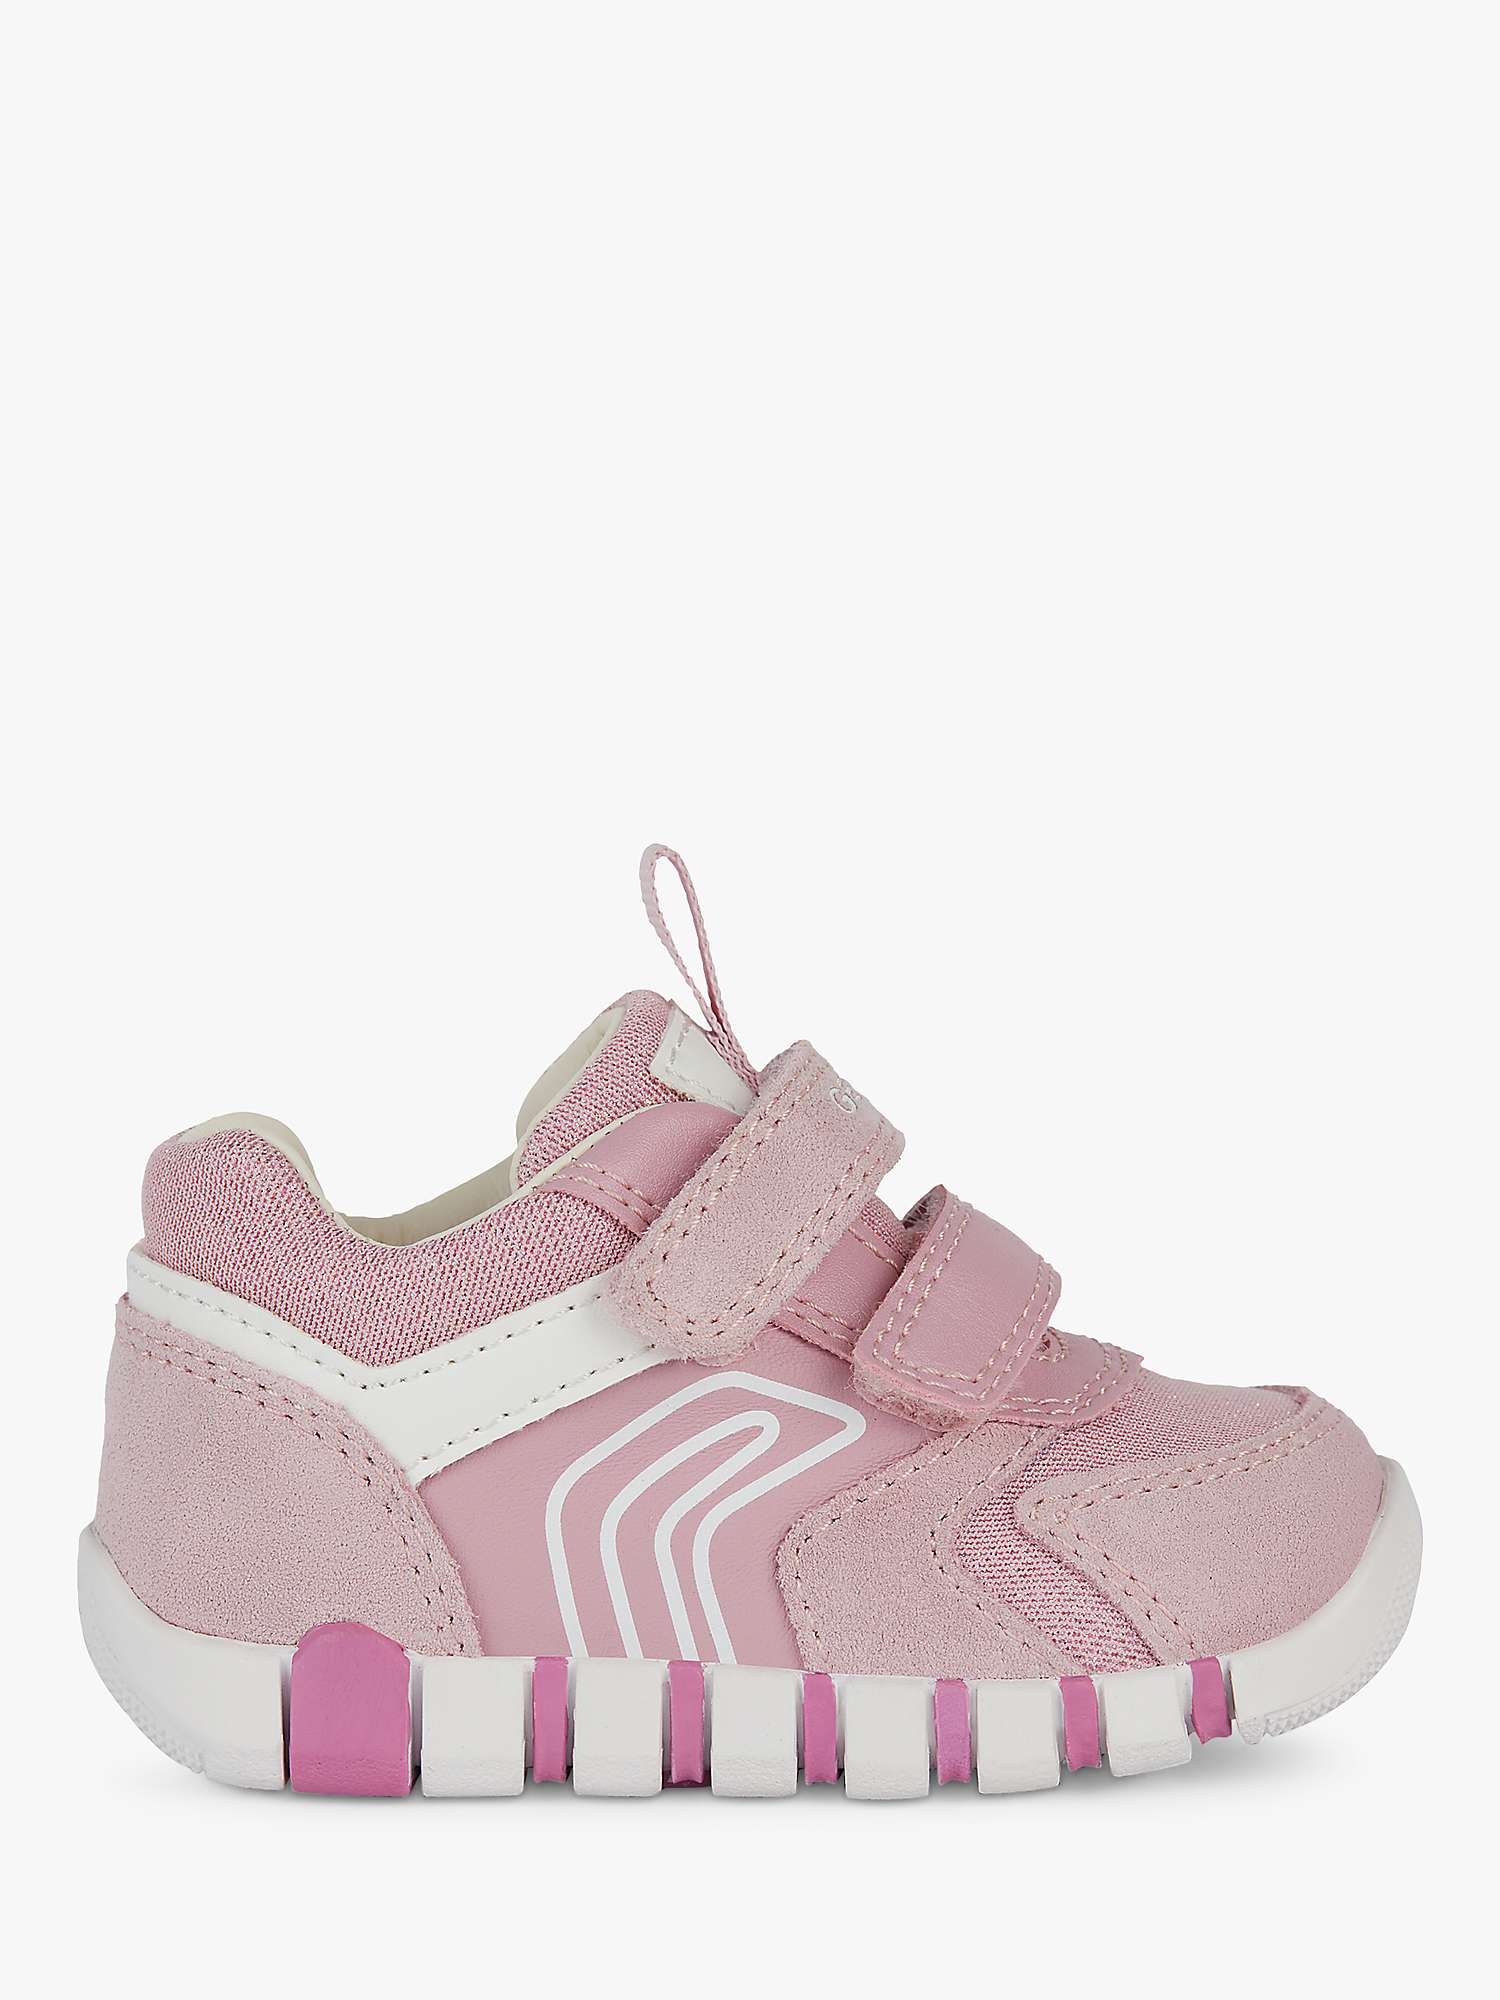 Buy Geox Kids' Iupidoo Leather Blend Pre-Walker Trainers, Rose/White Online at johnlewis.com